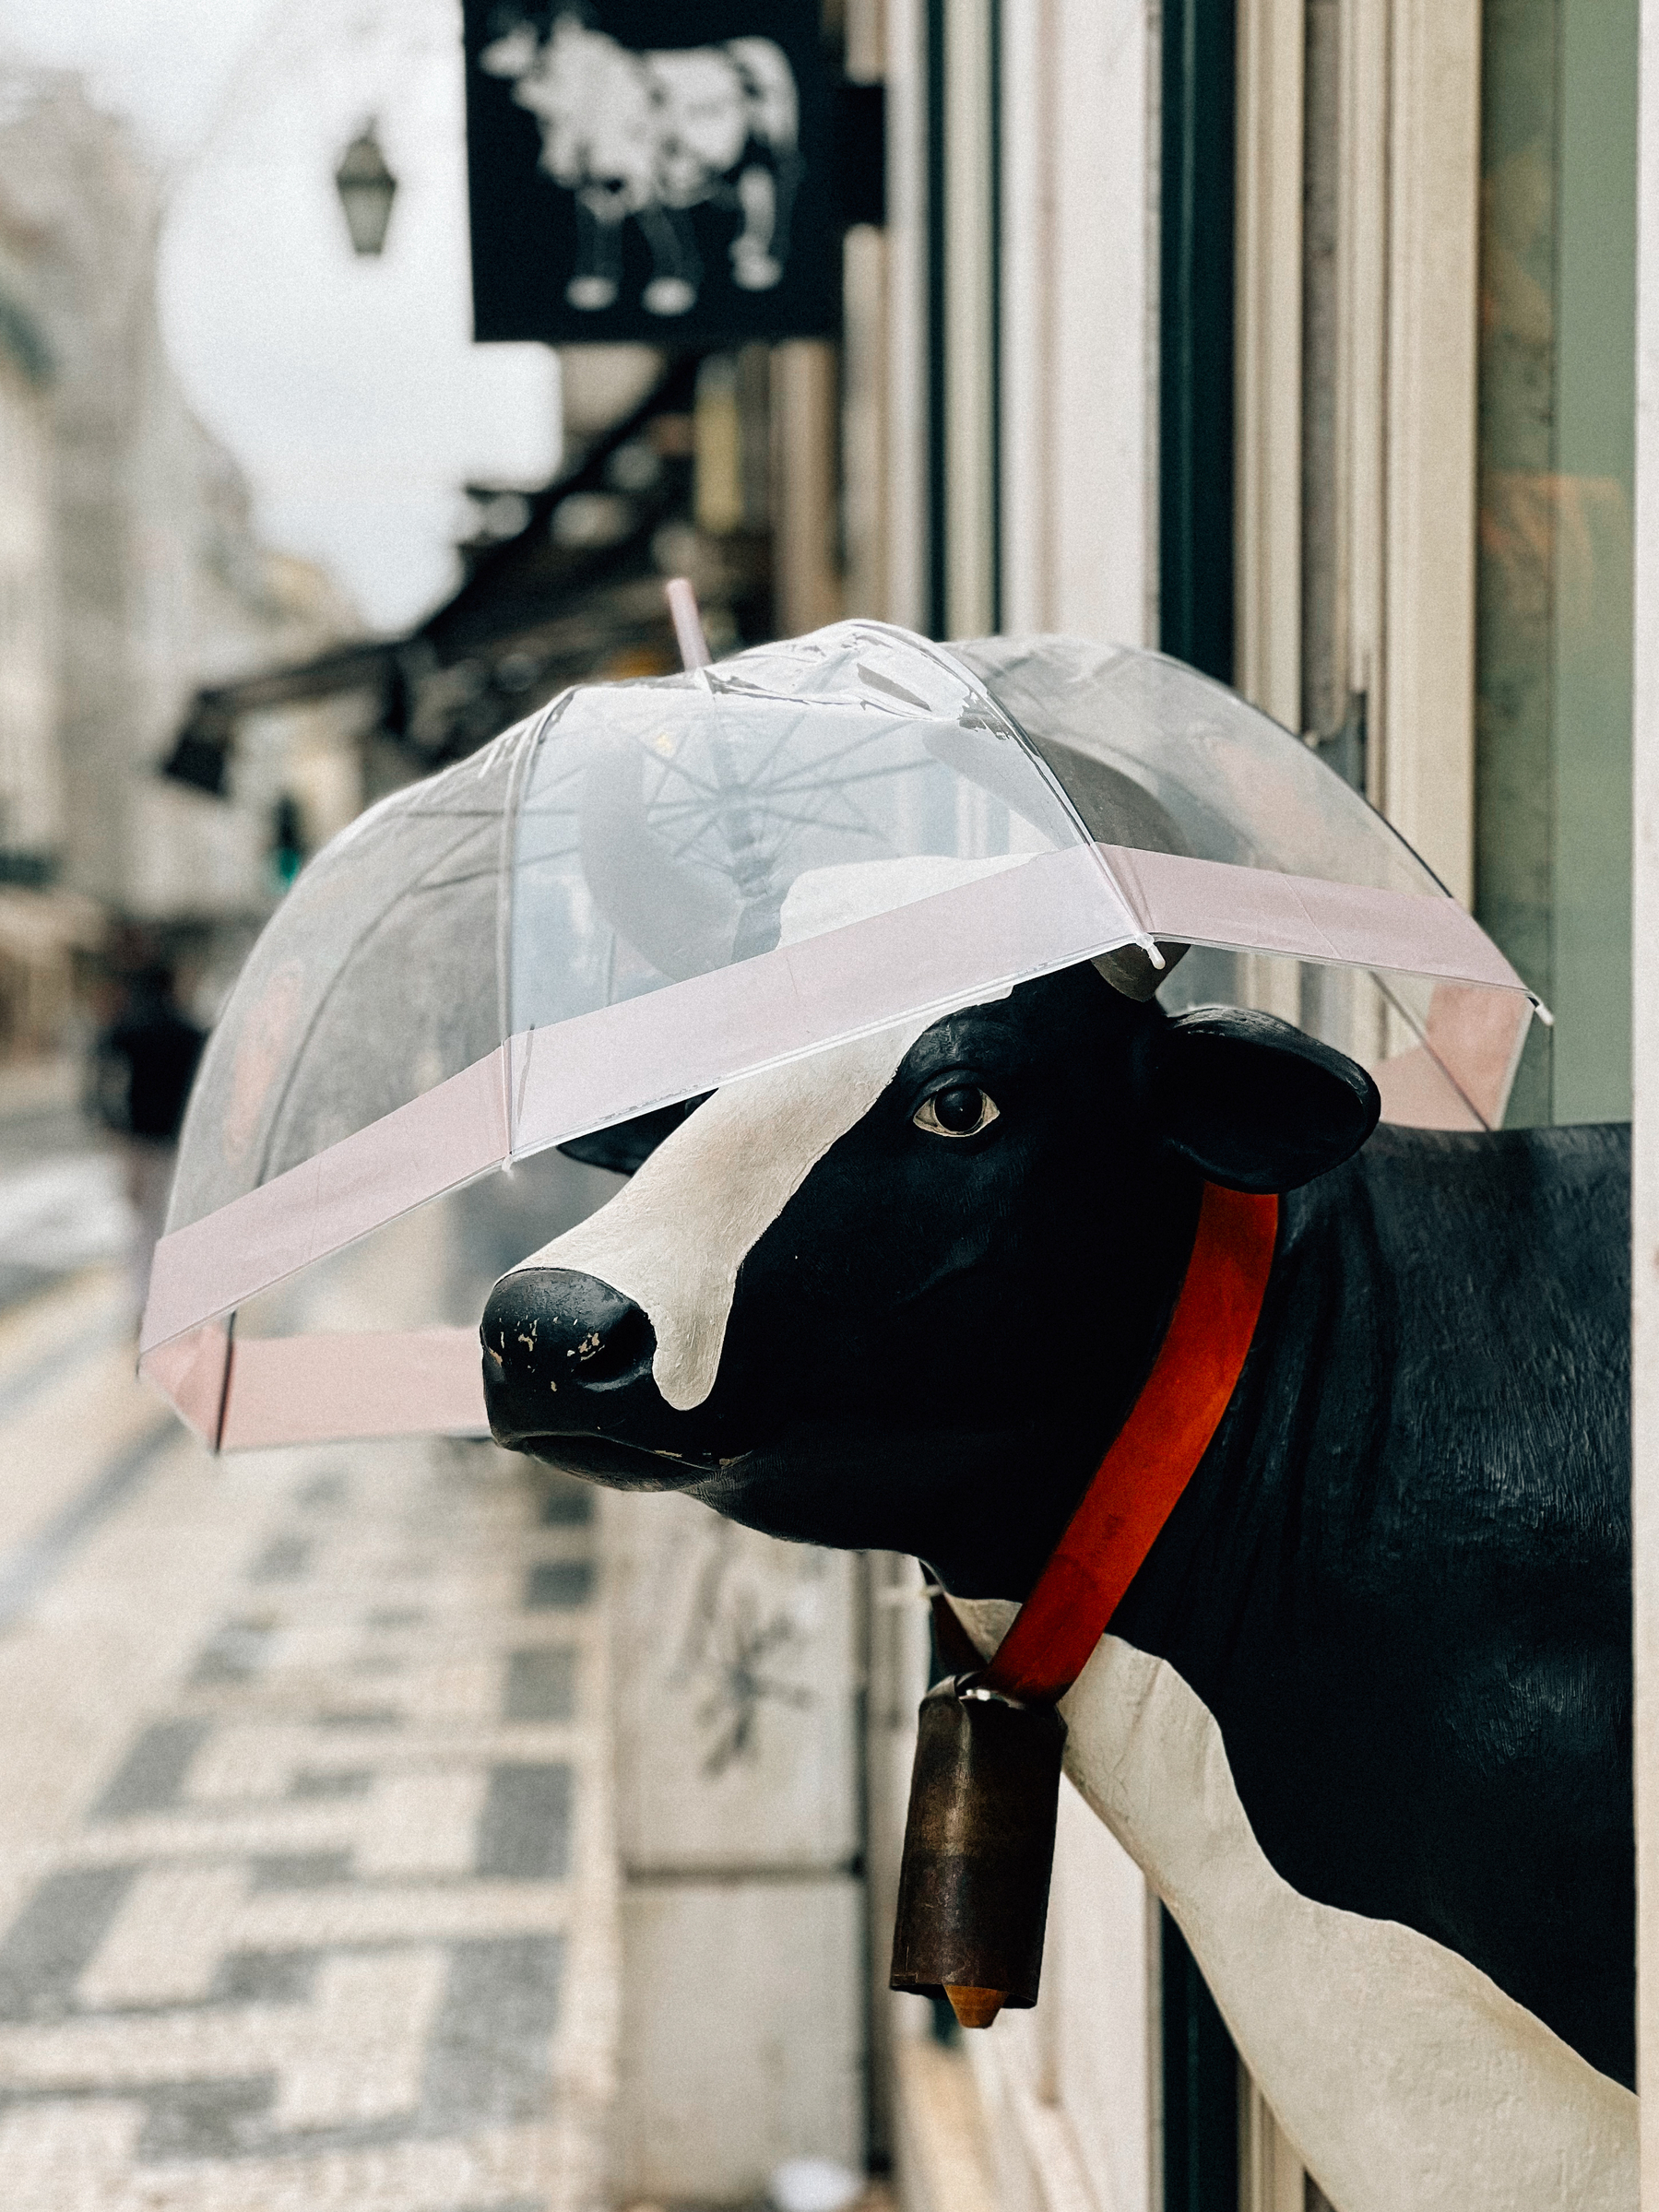 A statue of a cow wearing a red scarf with a bell, holding a transparent umbrella with its mouth, against a blurred street background.